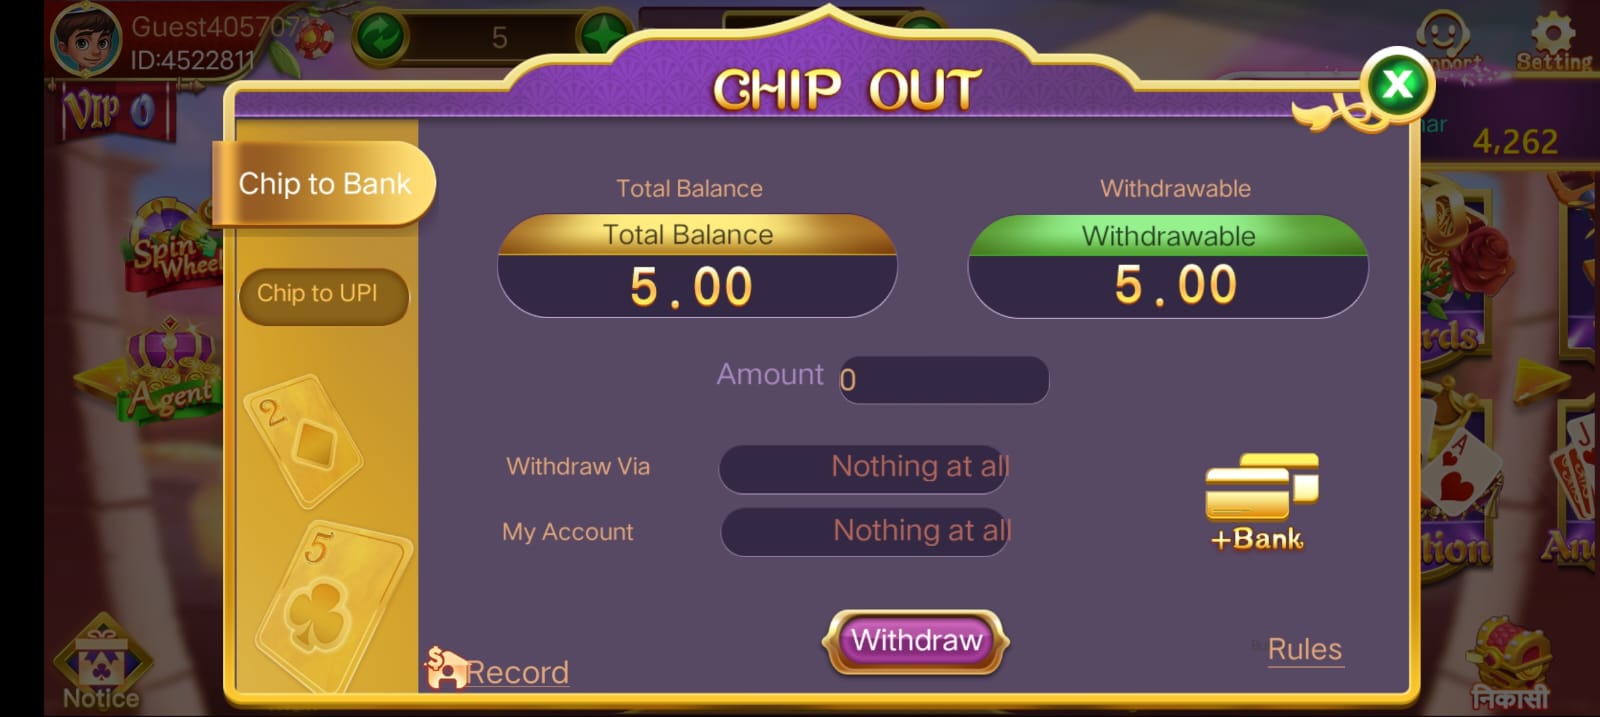 Withdrawal In Rummy Tour App